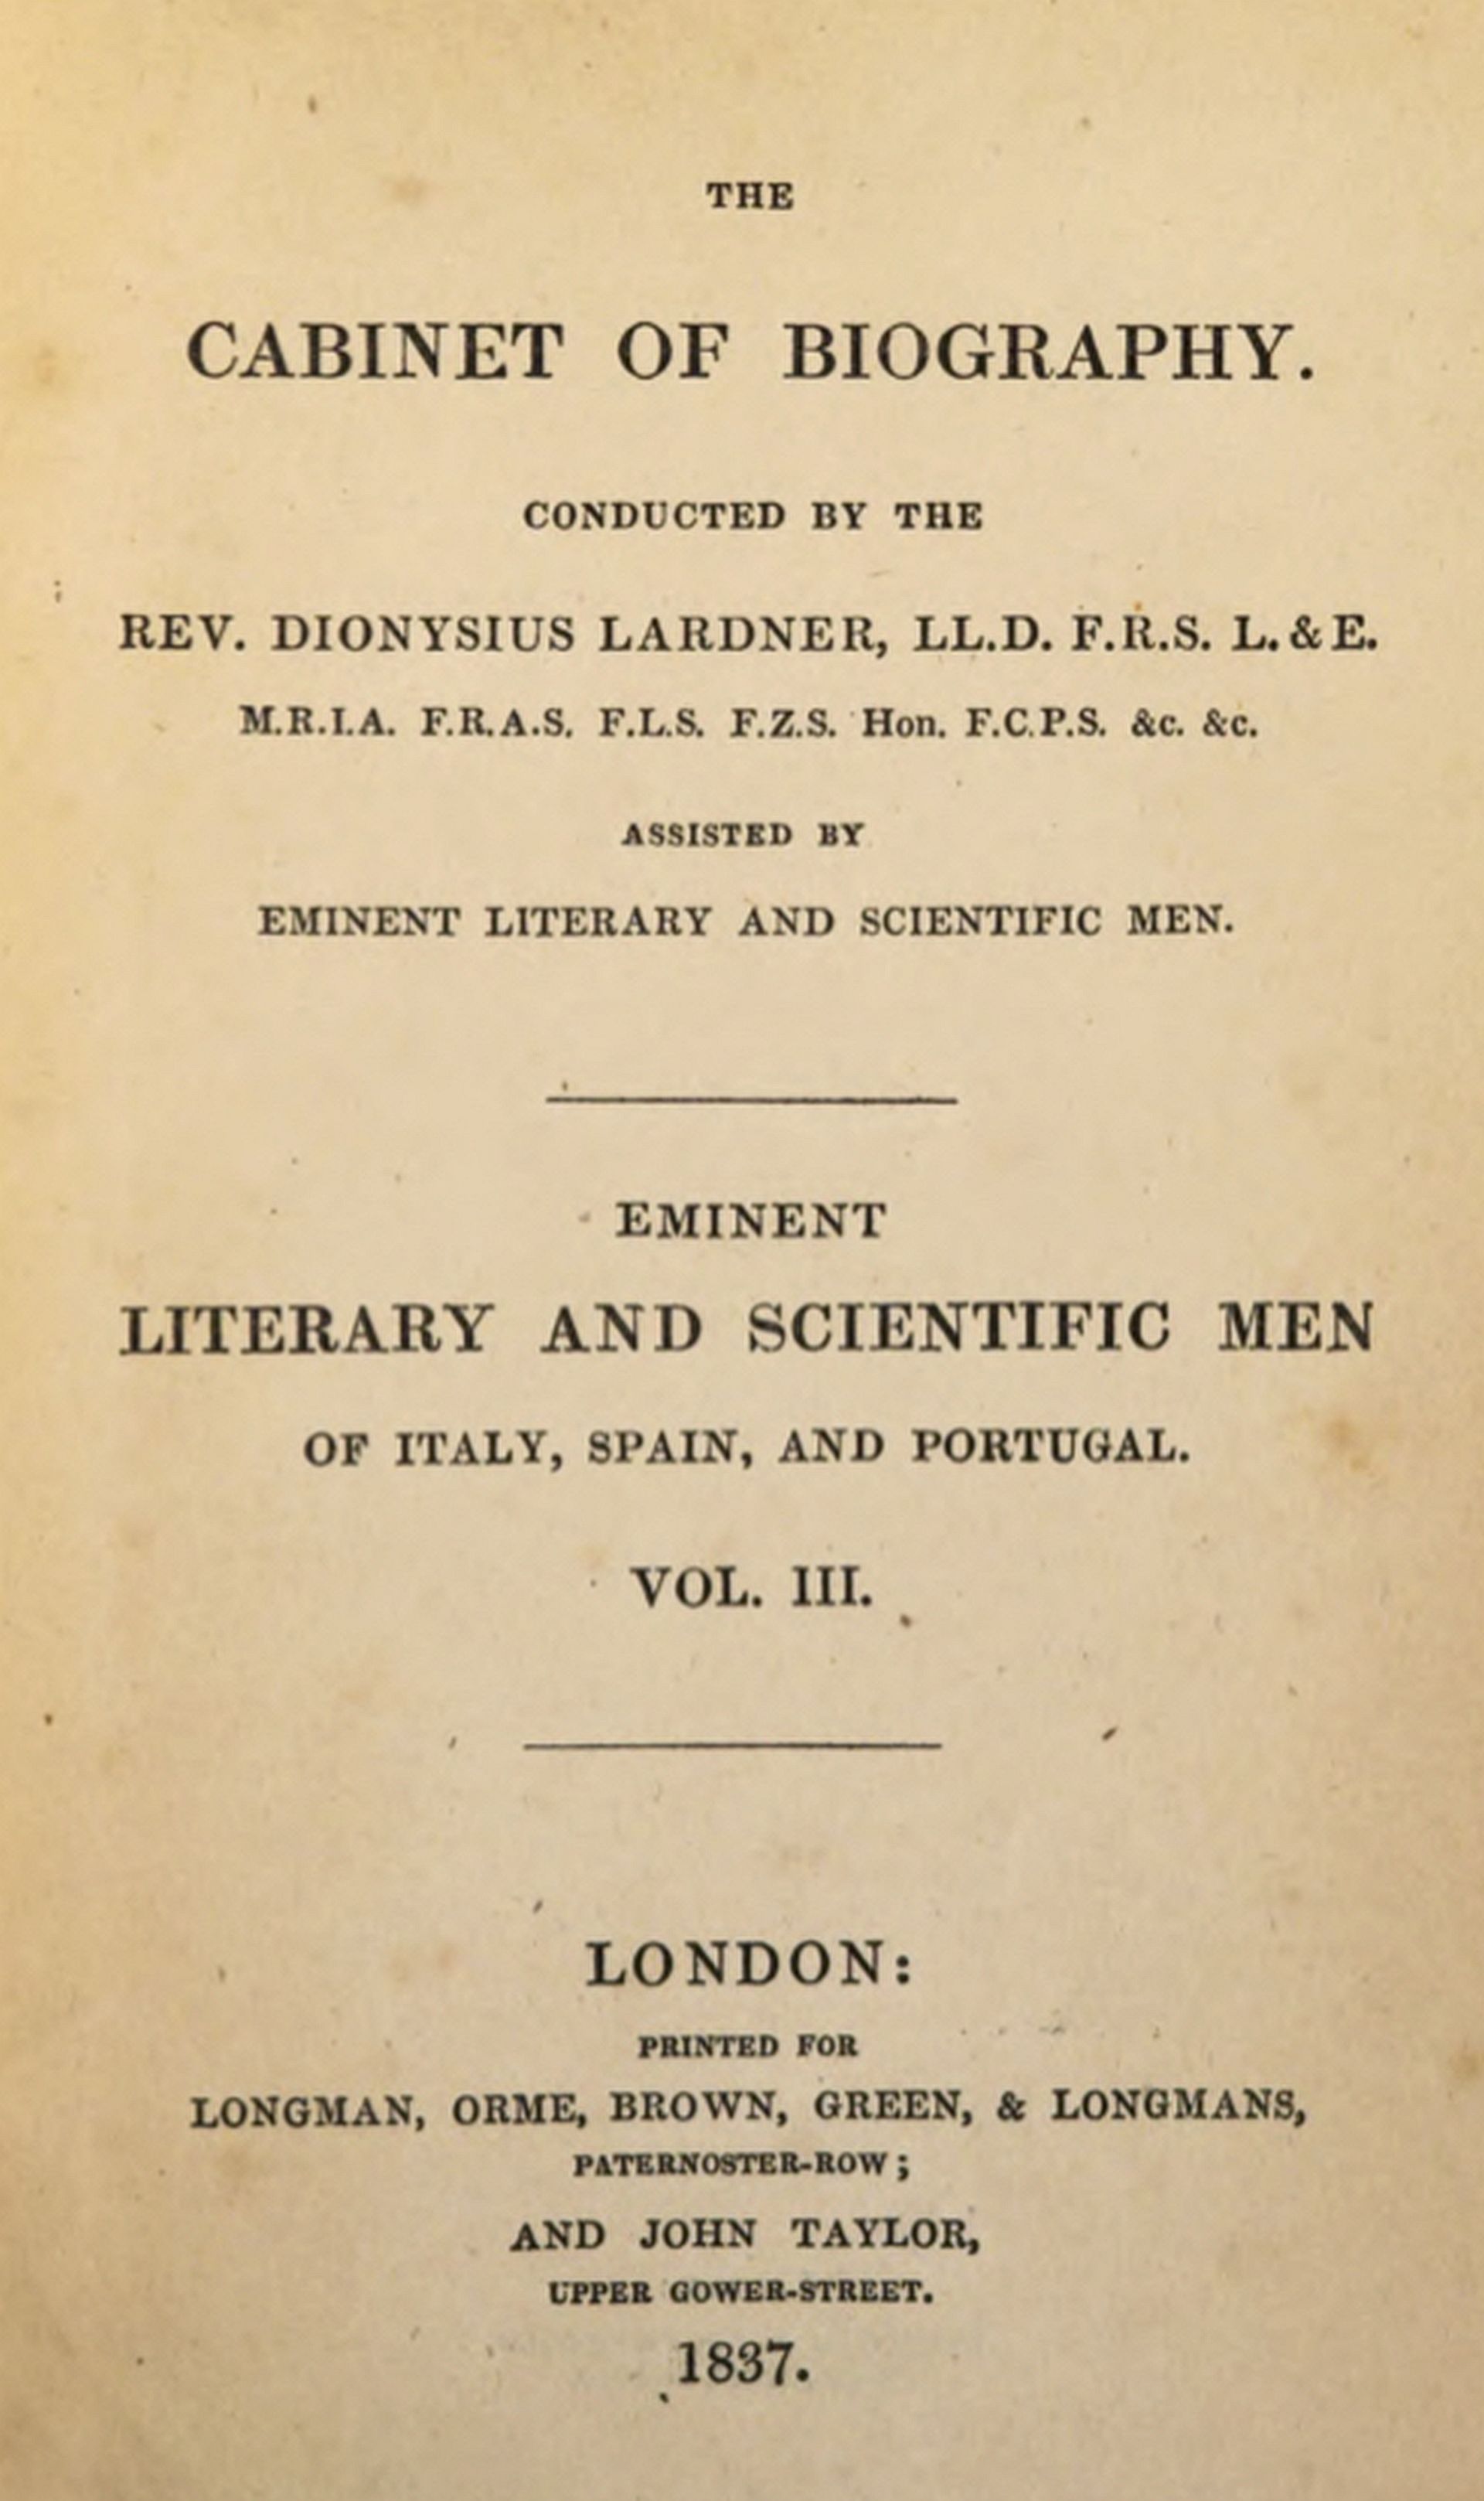 The Project Gutenberg eBook of Eminent literary and scientific men of  Italy, Spain and Portugal, Vol. 3 (of 3), by James Montgmery and Mary  Shelley.